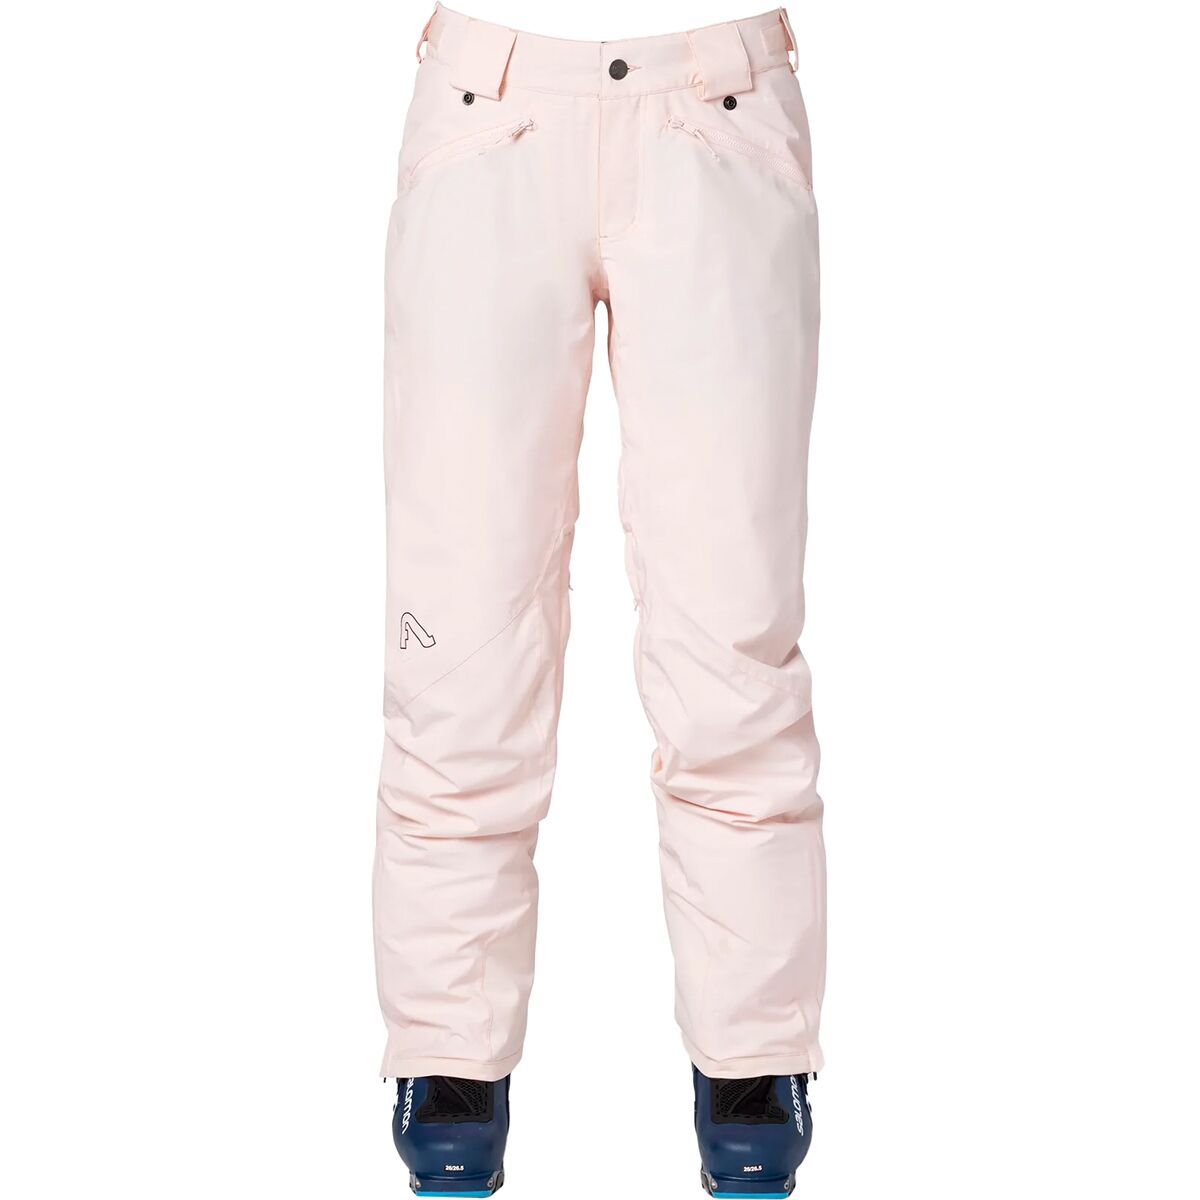 Flylow Daisy Insulated Pant Women's Clothing